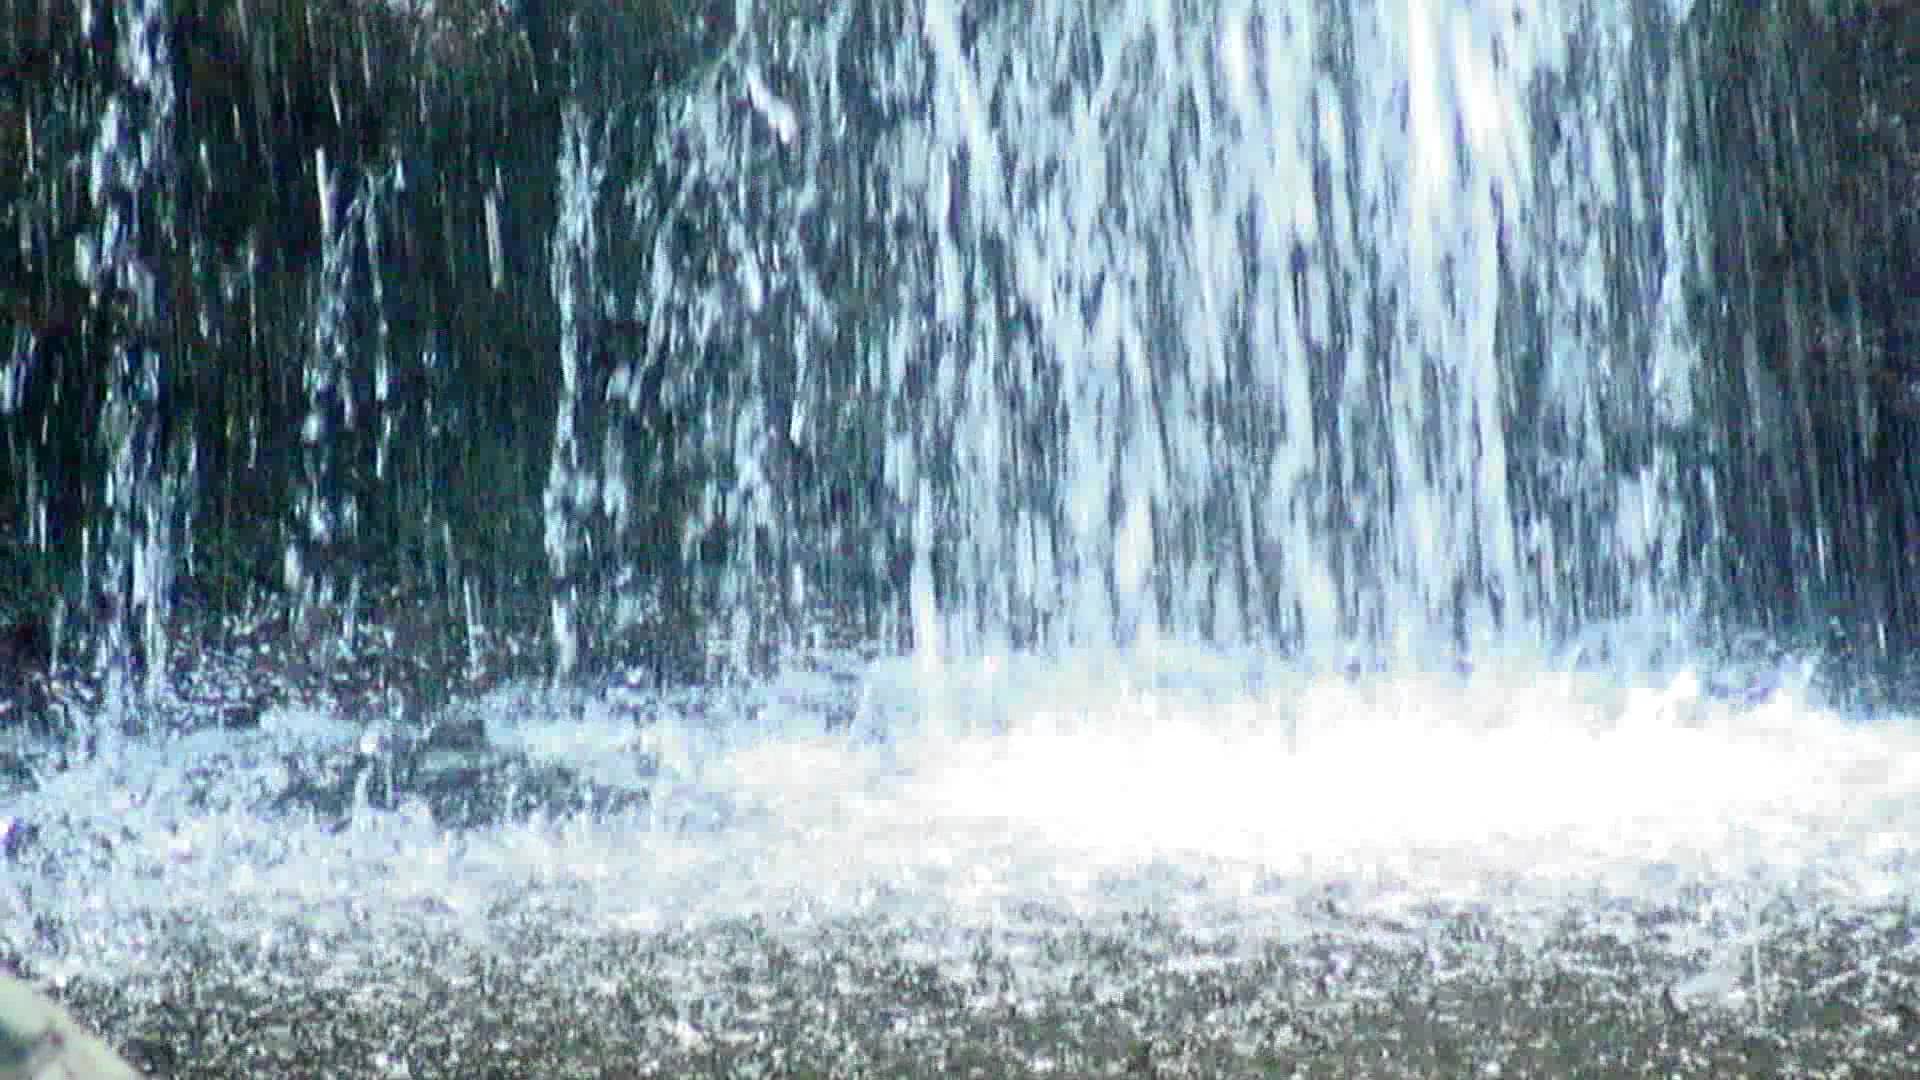 Water from a waterfall splashing into a pond. - YouTube